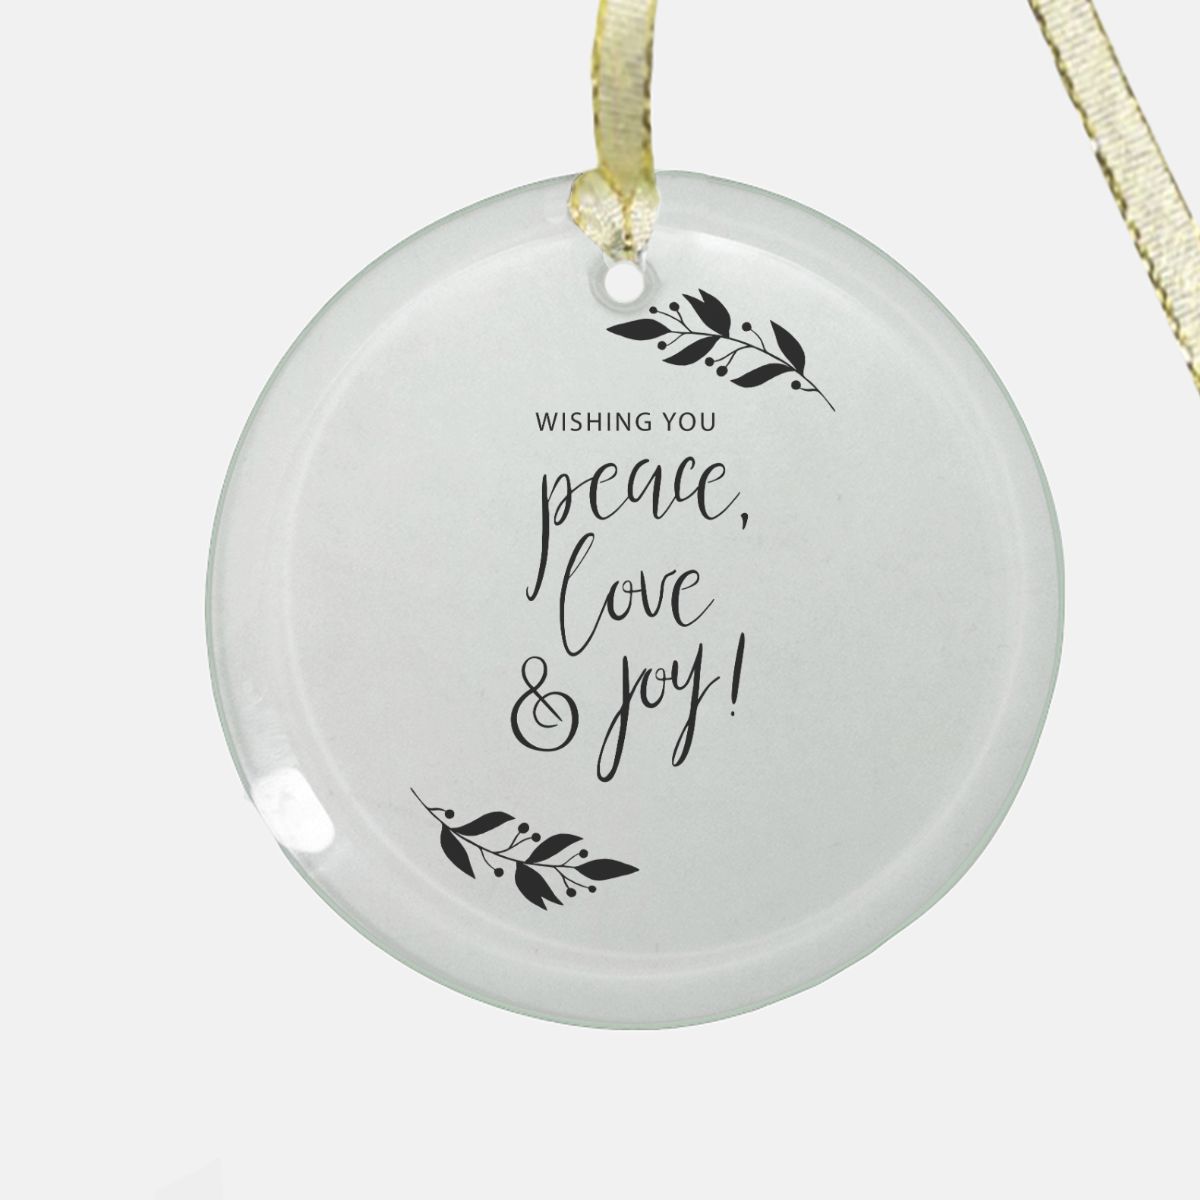 Round Clear Glass Holiday Ornament - Peace, Love & Joy